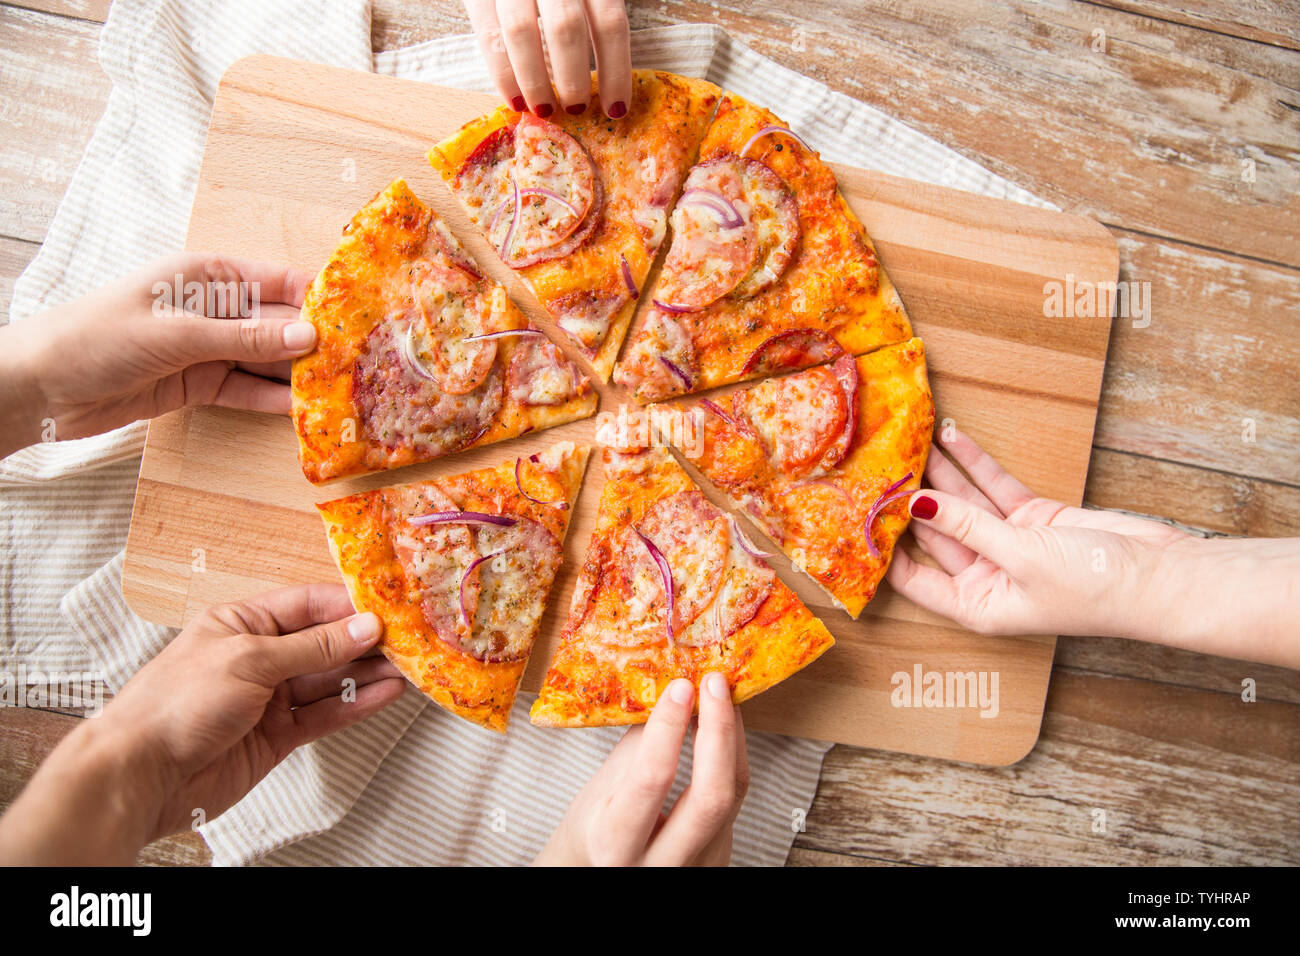 close up of hands sharing pizza on wooden table Stock Photo